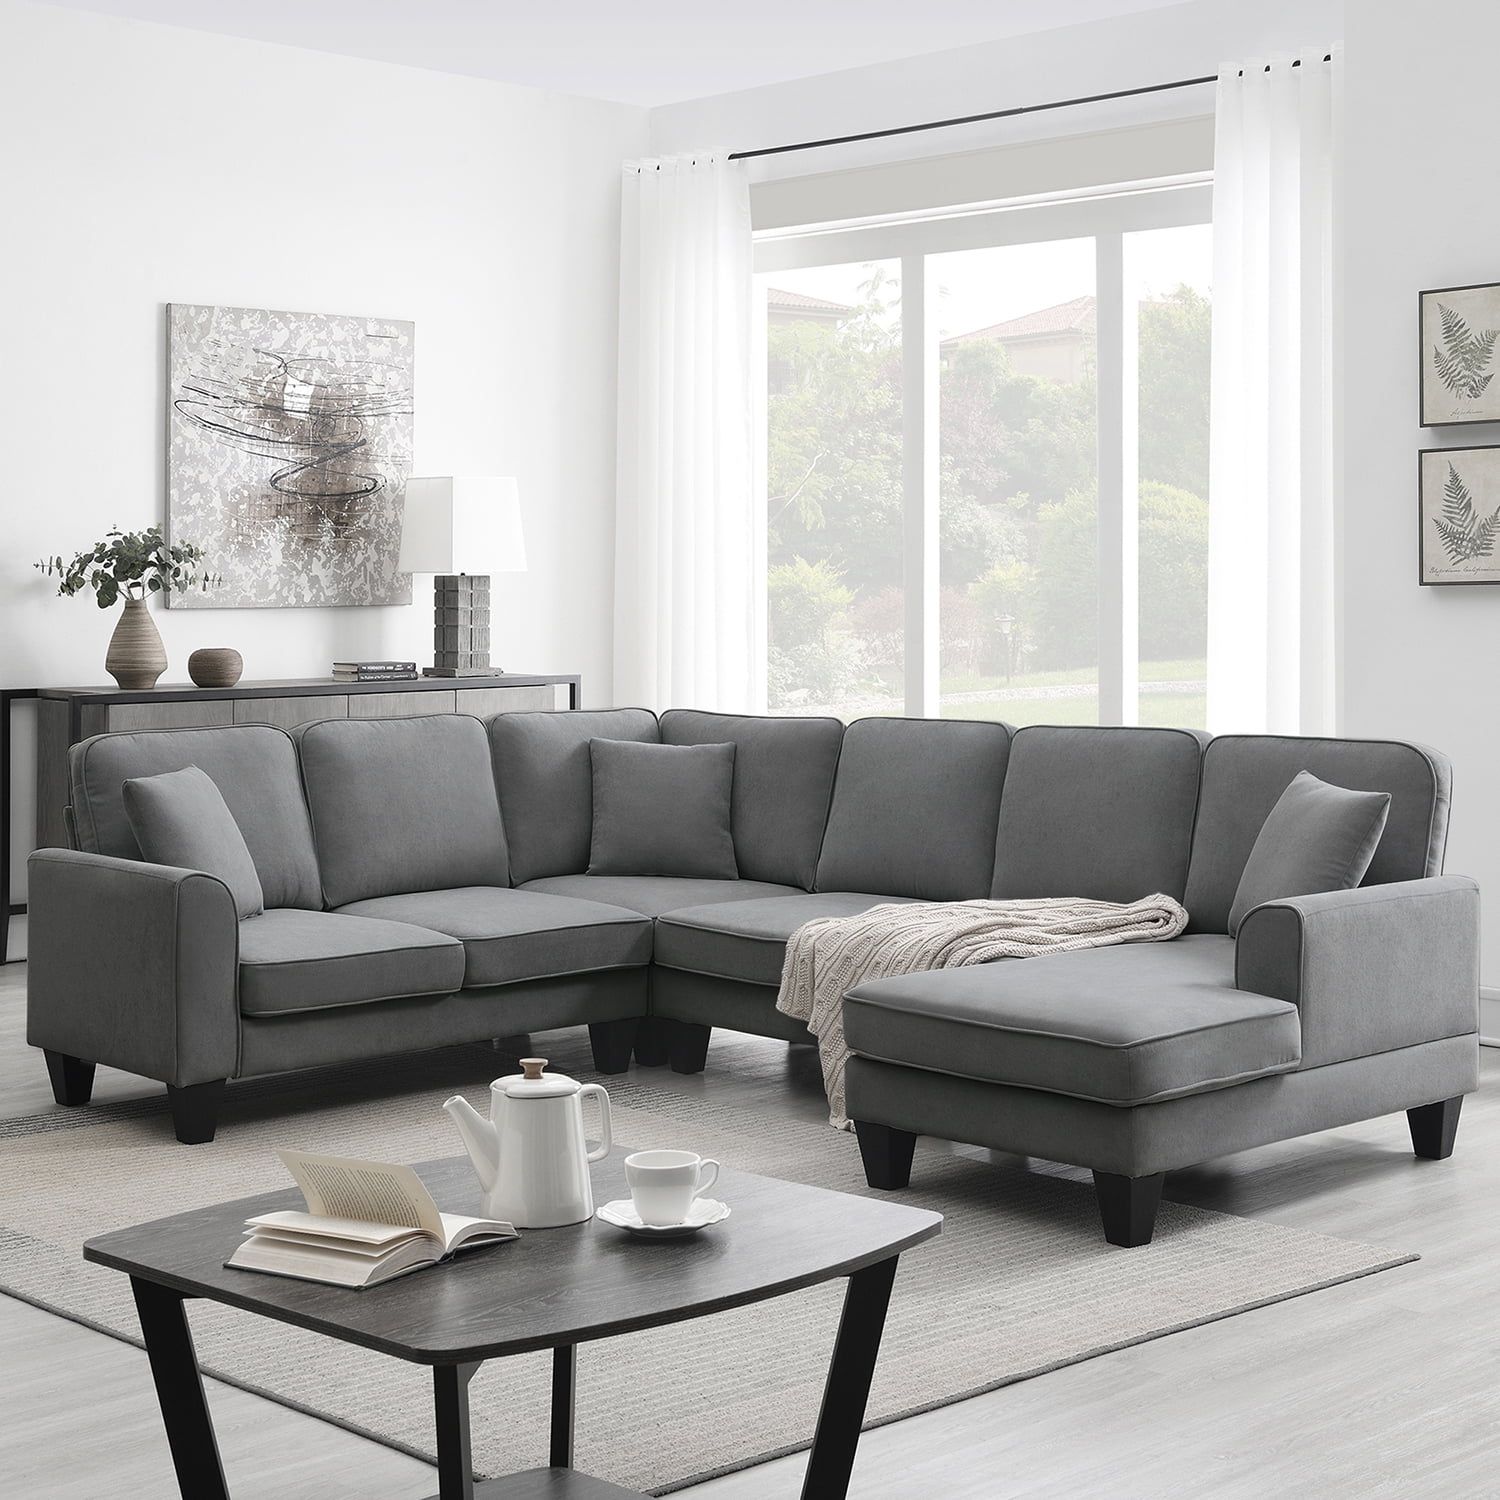 Churanty Convertible Modular Sectional Sofa With Chaise And Recliner,U  Shaped Couch 7 Seat Fabric Sleeper Sofa For Living Room,Dark Gray –  Walmart Throughout Dark Gray Sectional Sofas (Photo 14 of 15)